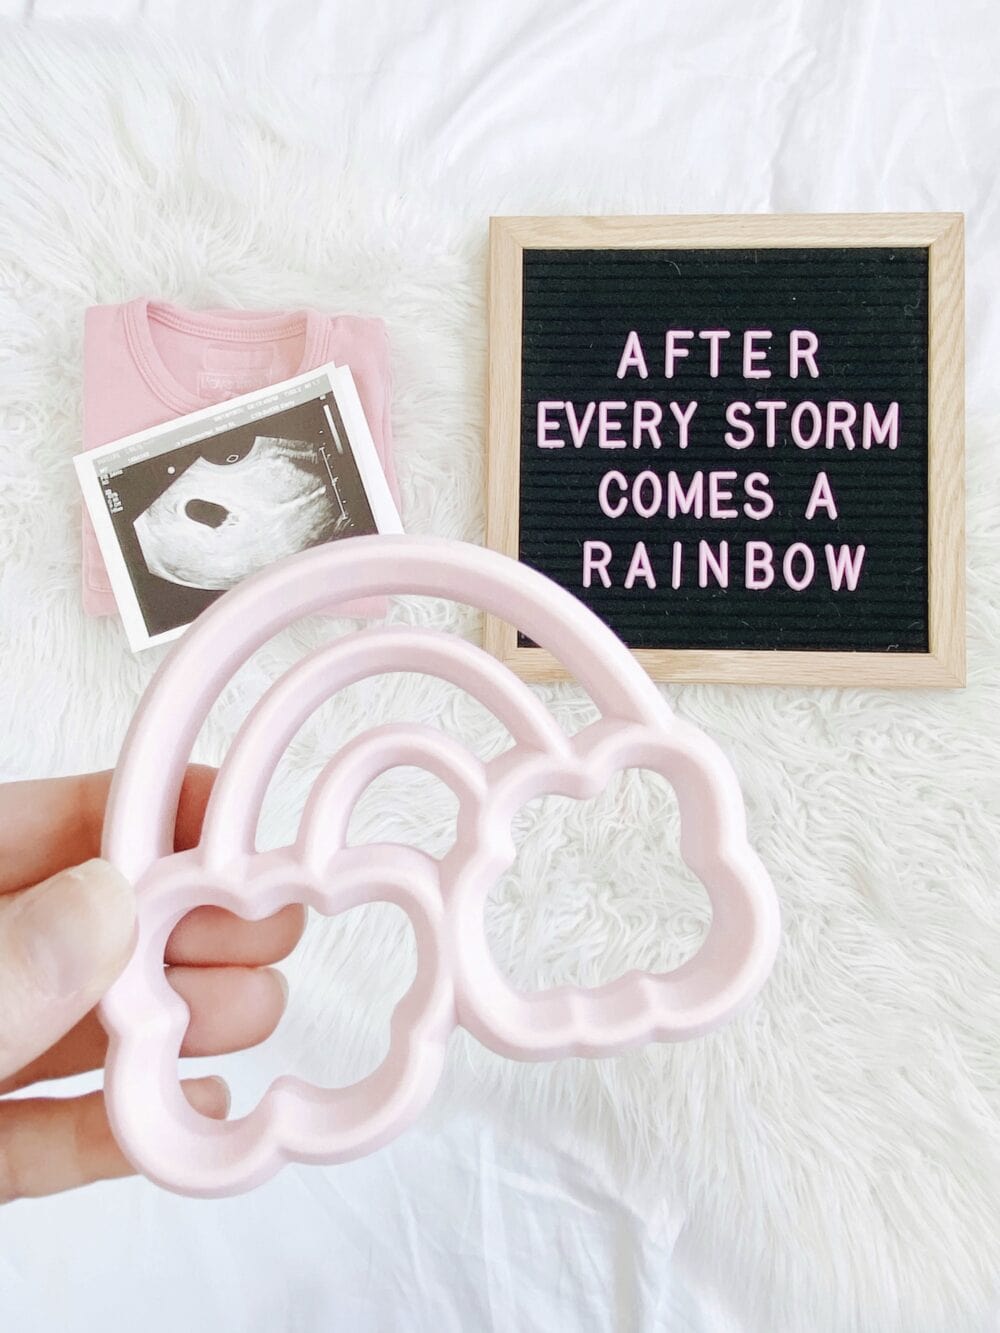 After every storm comes a rainbow baby teether.